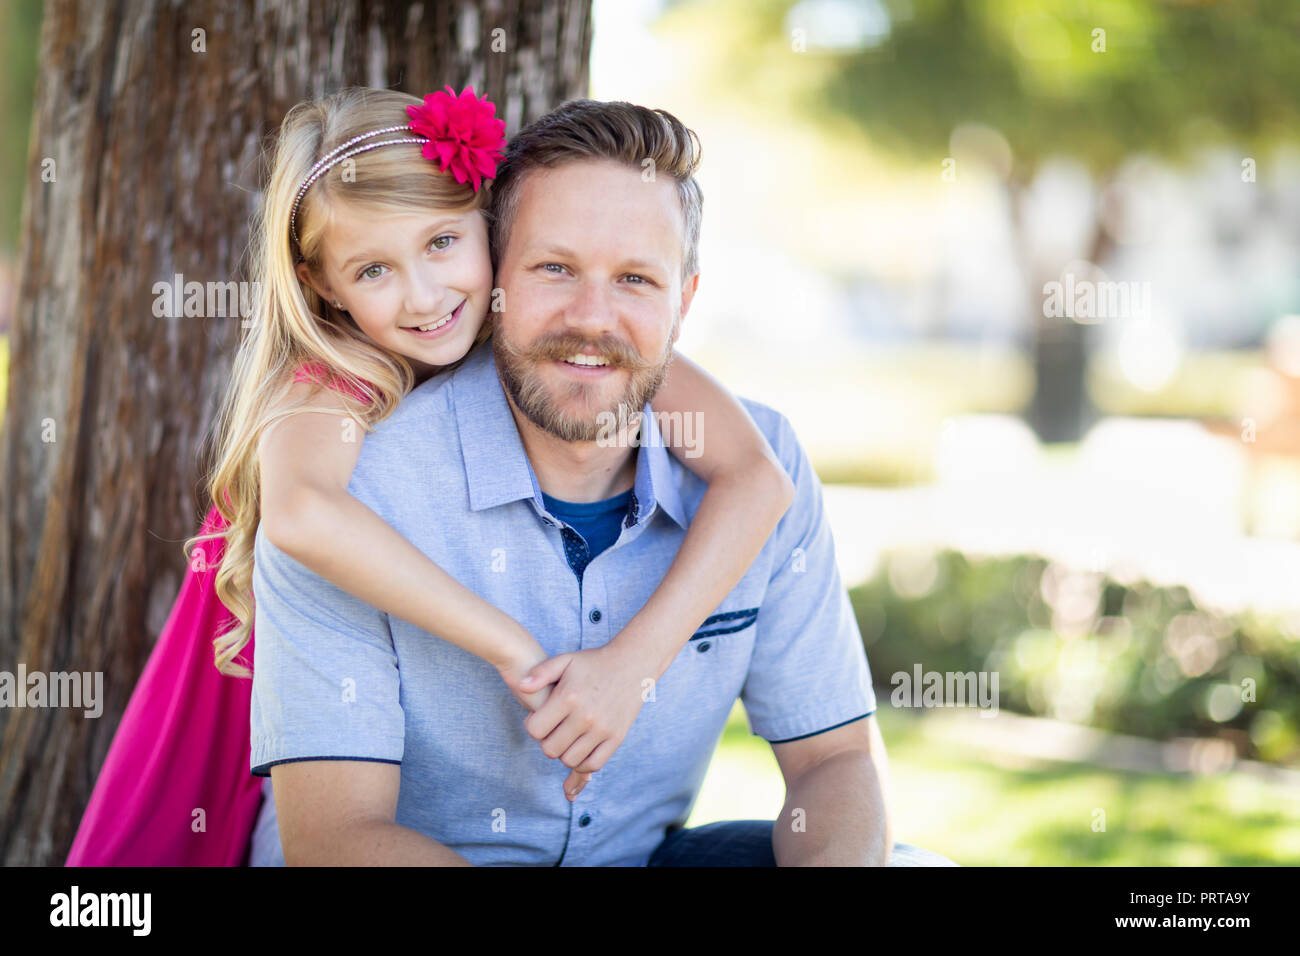 Young Caucasian Father And Daughter Portrait At The Park. Stock Photo